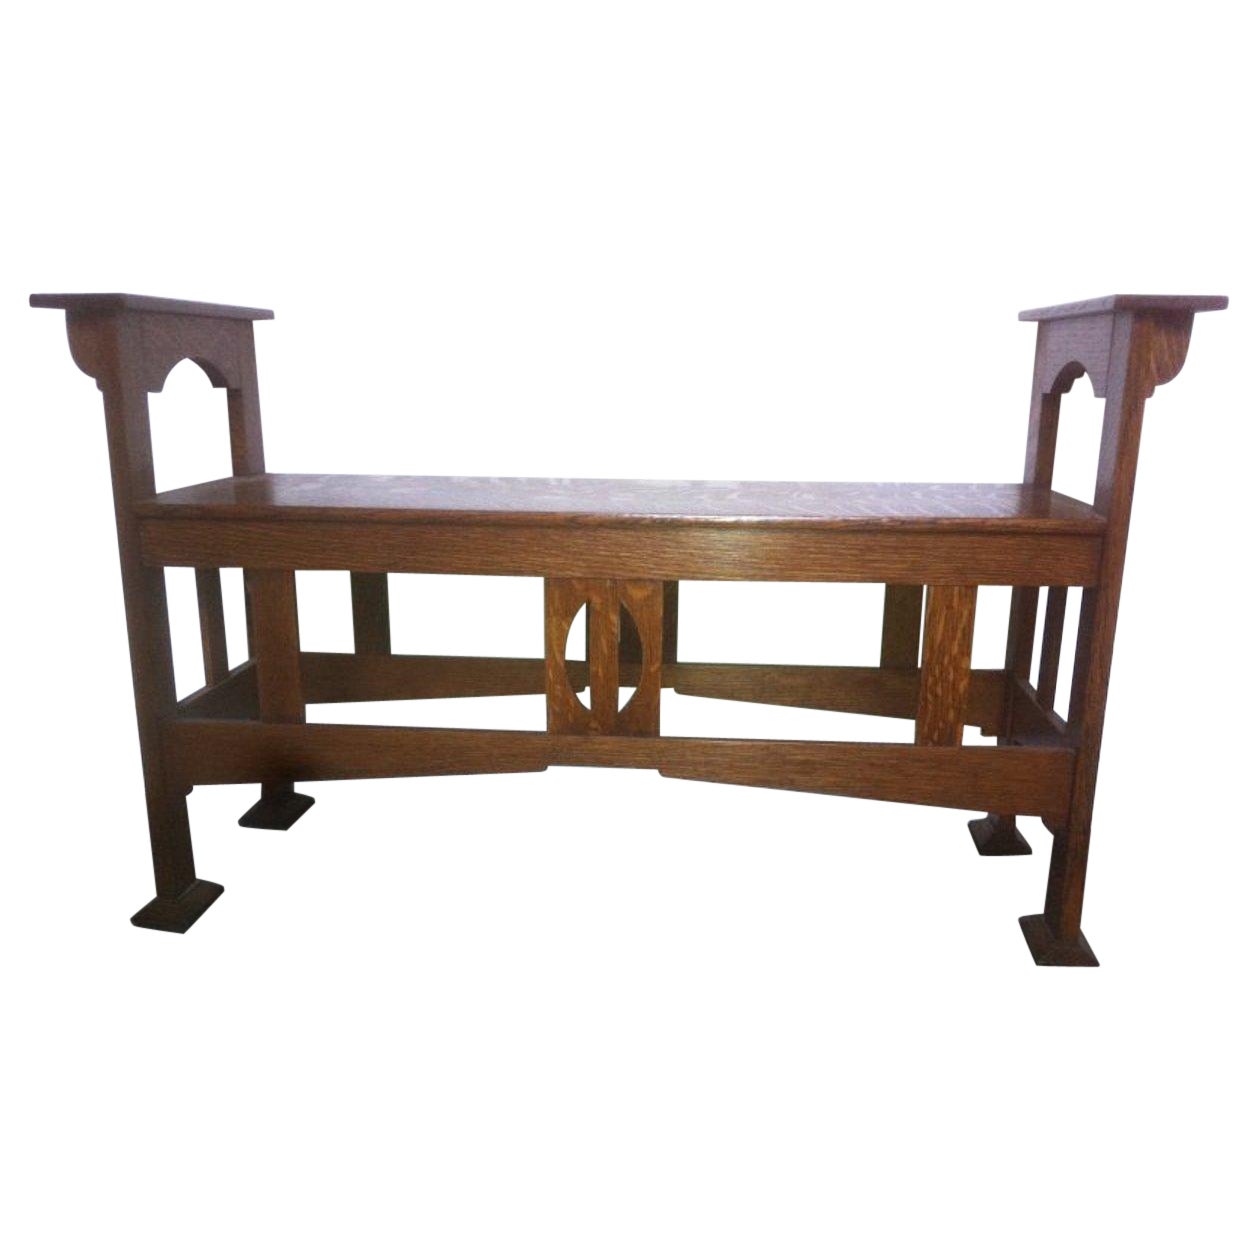 Shapland & Petter, A Good Arts & Crafts Oak Double Piano Stool Or Window Seat For Sale